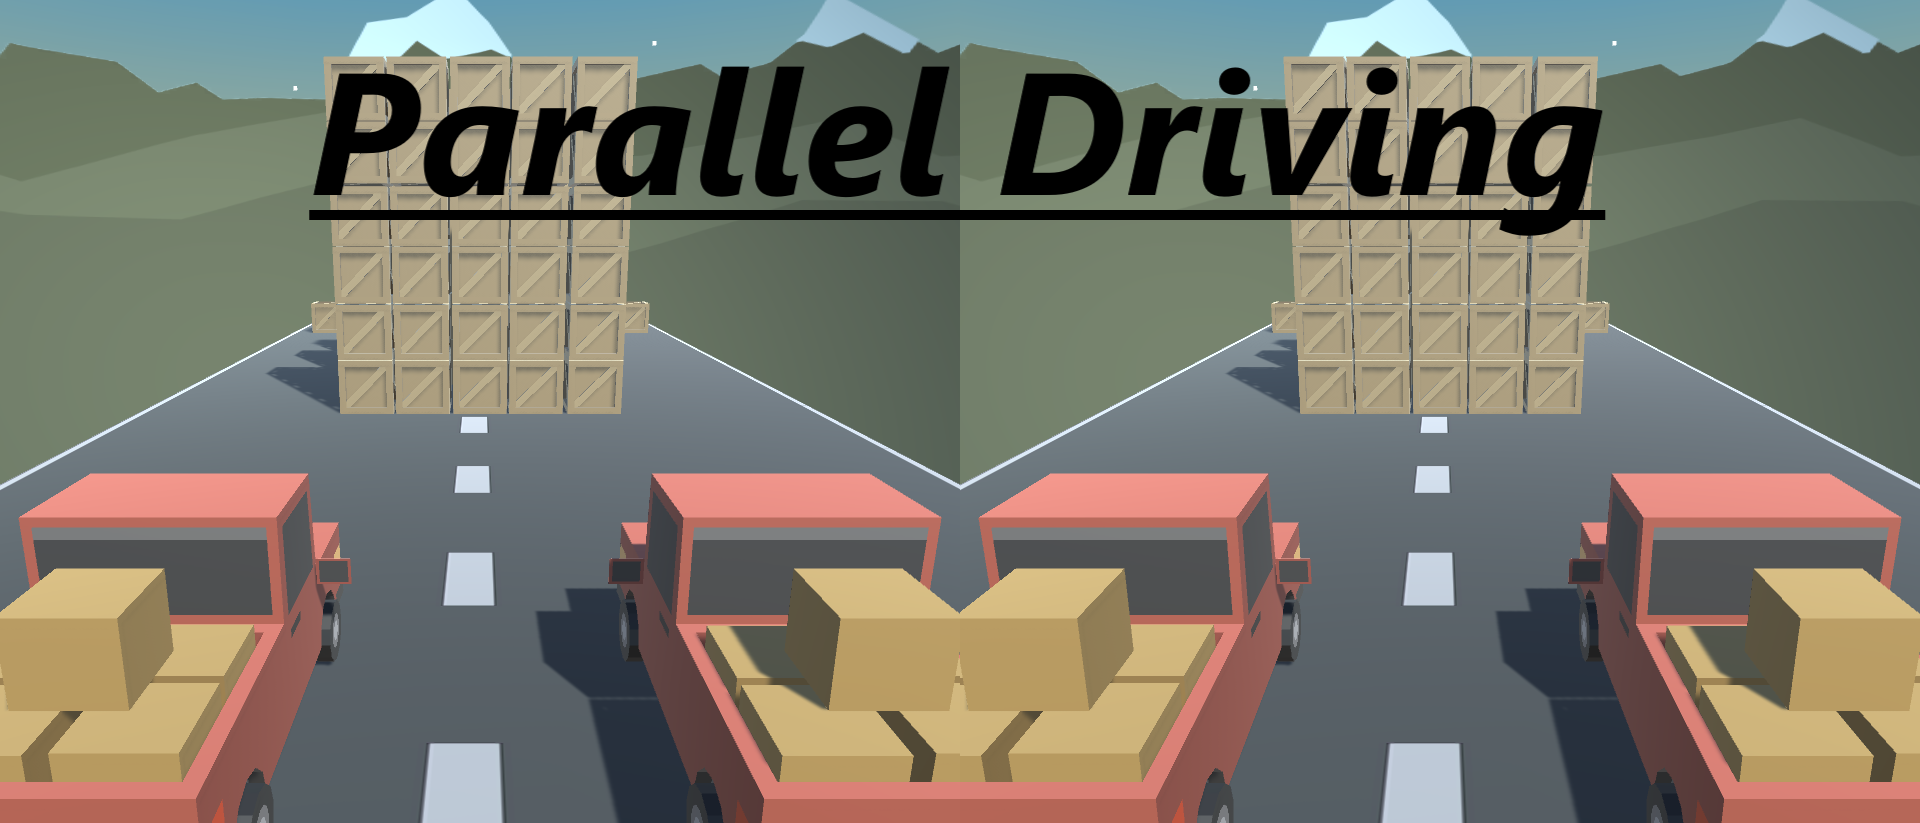 Parallel Driving